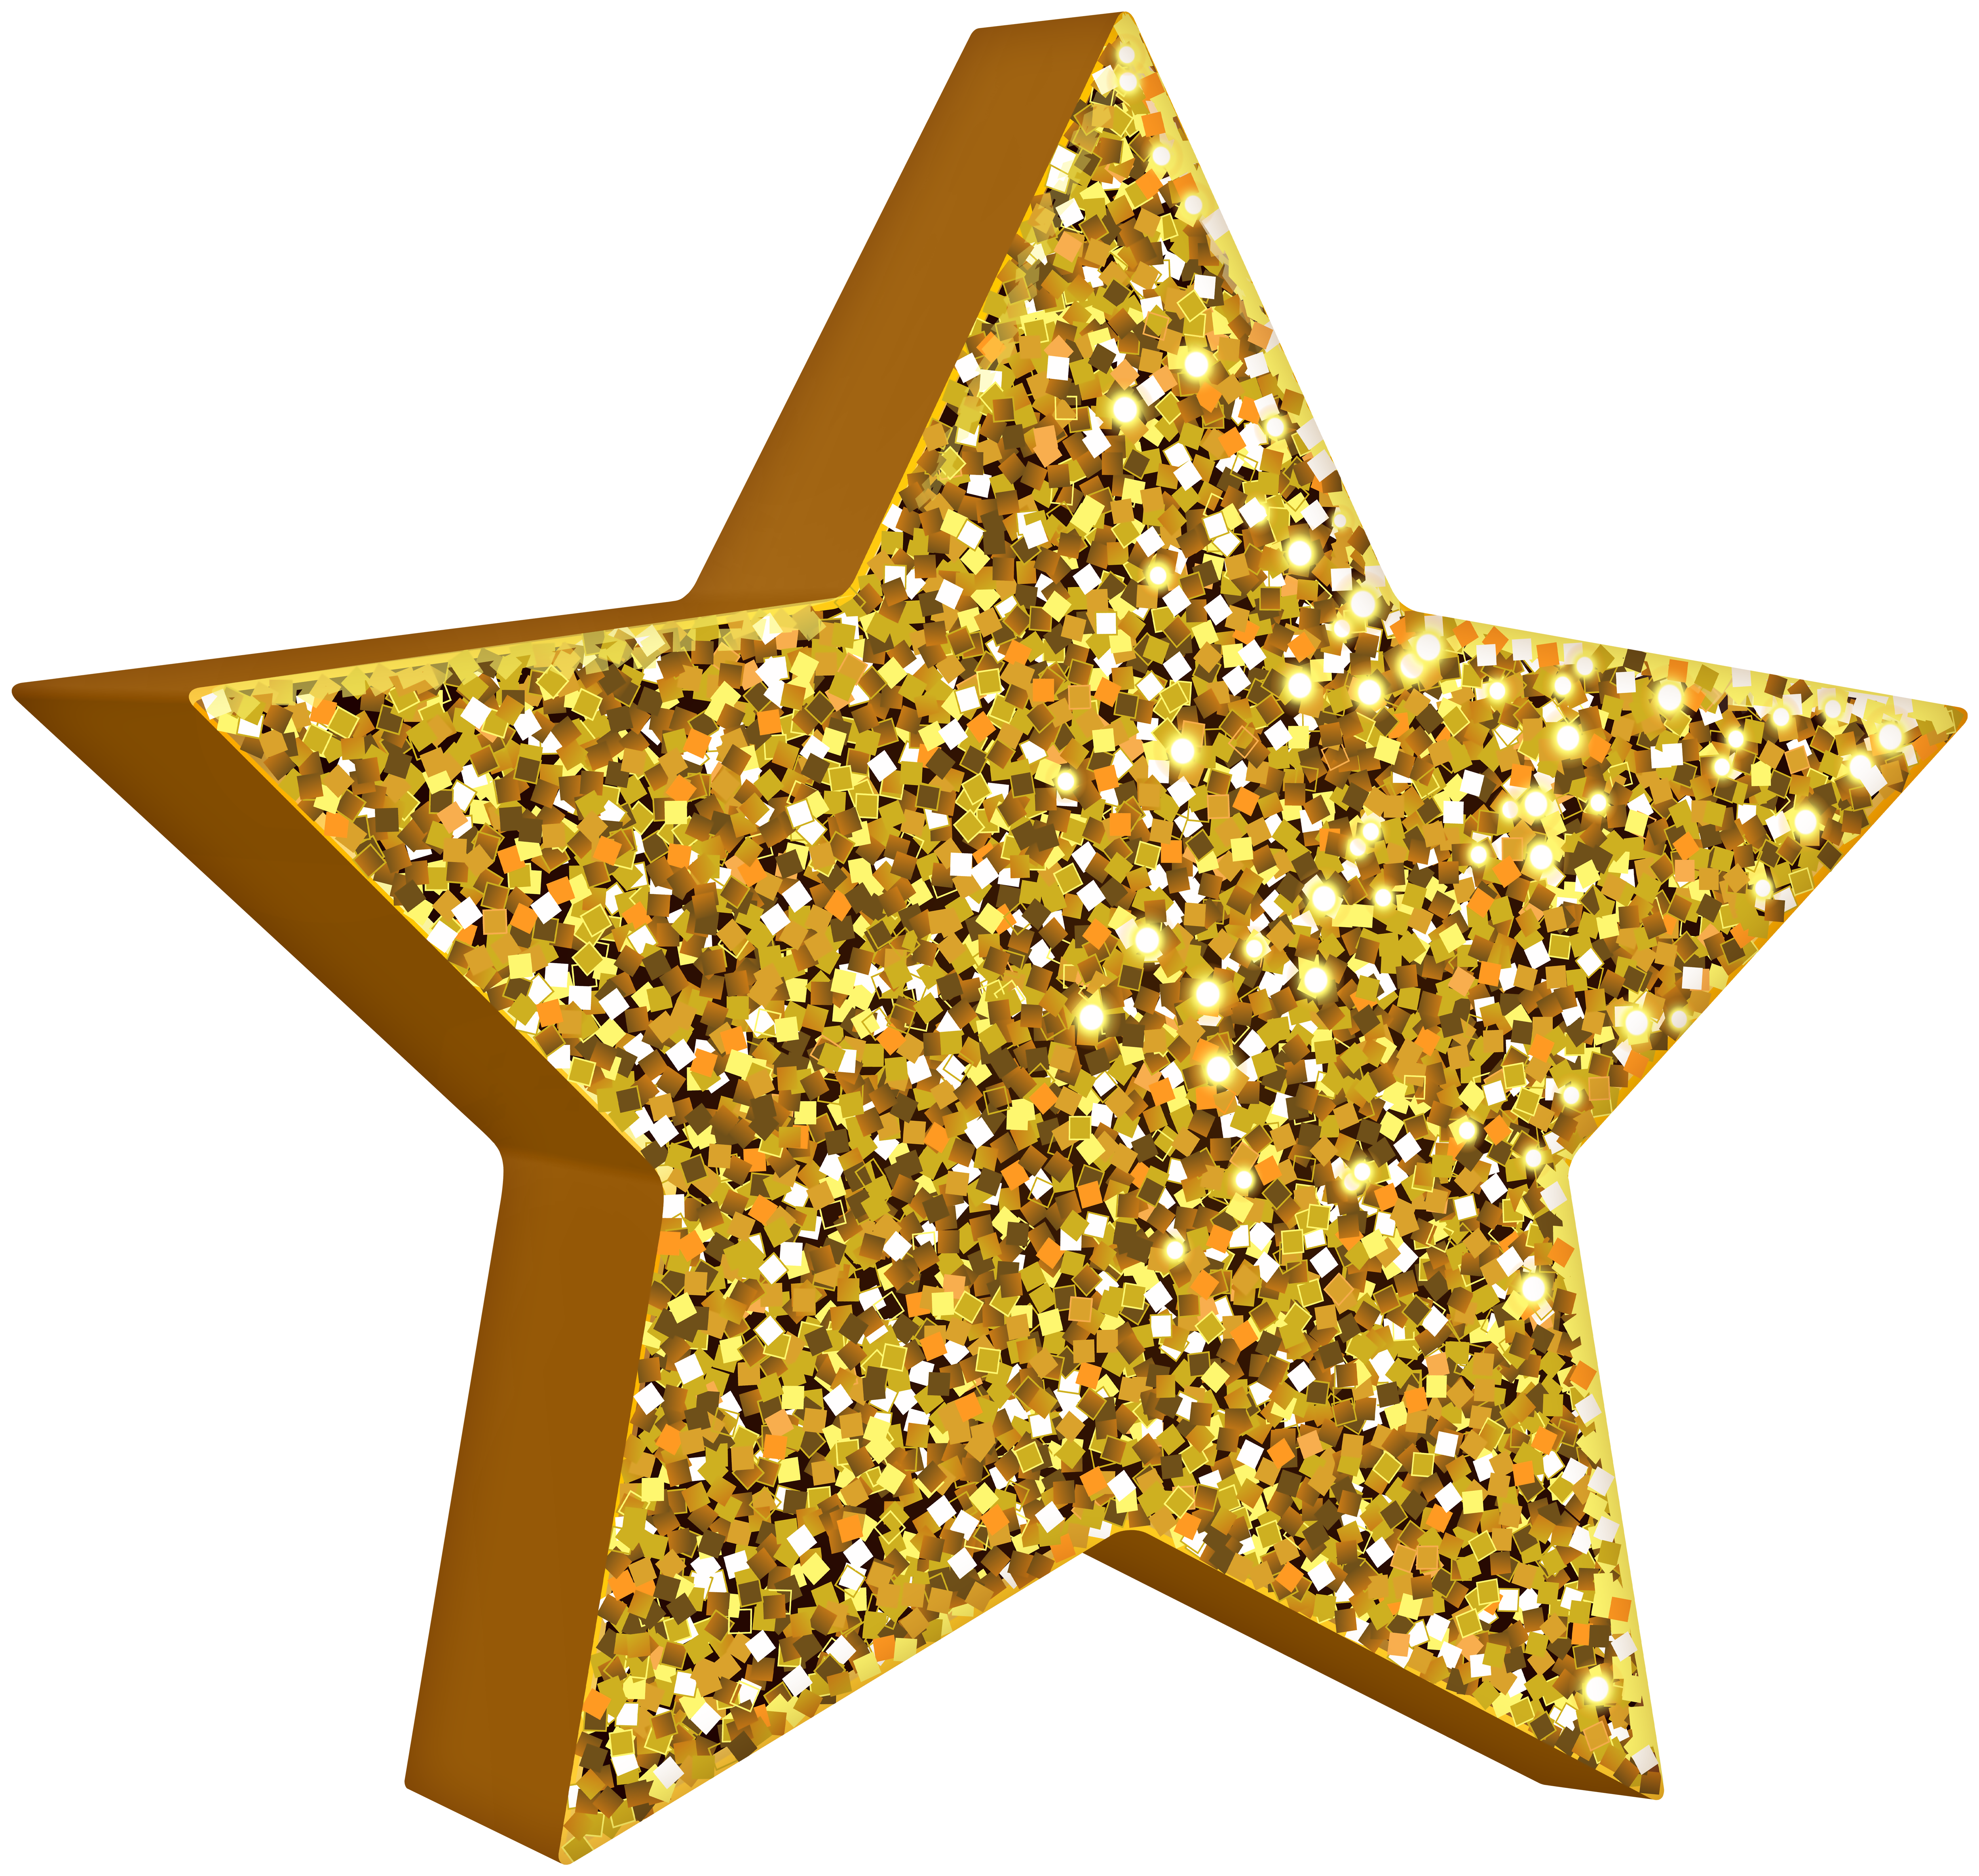 Gold Star Clip Art PNG Image​  Gallery Yopriceville - High-Quality Free  Images and Transparent PNG Clipart